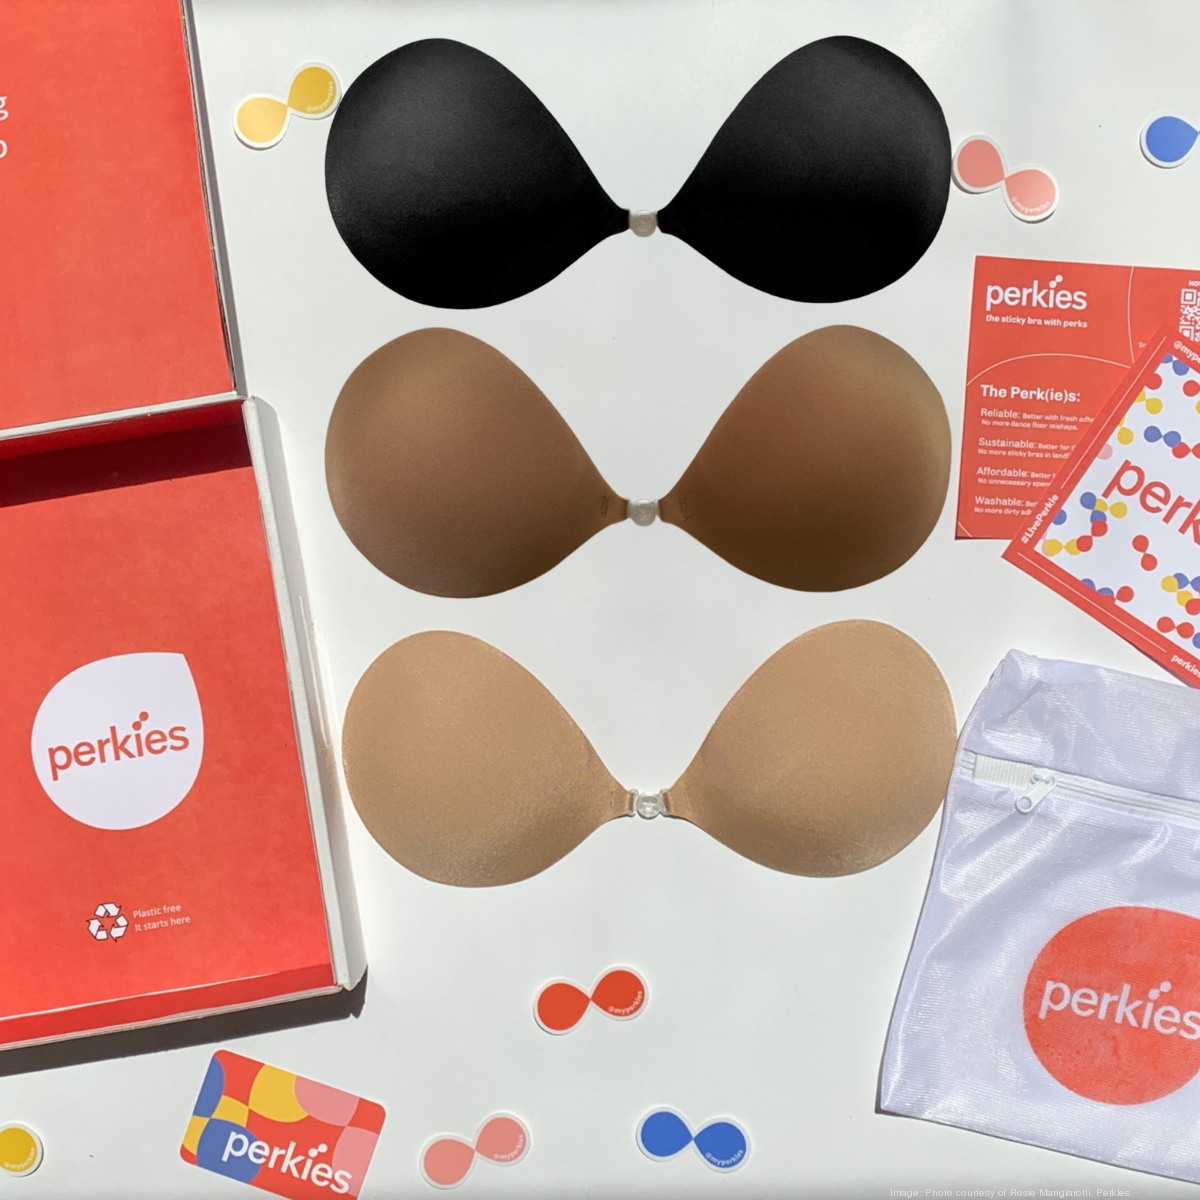 Rhode Island Inno - Perkies launches pre-orders for stick-on bra after  Covid-19 delays